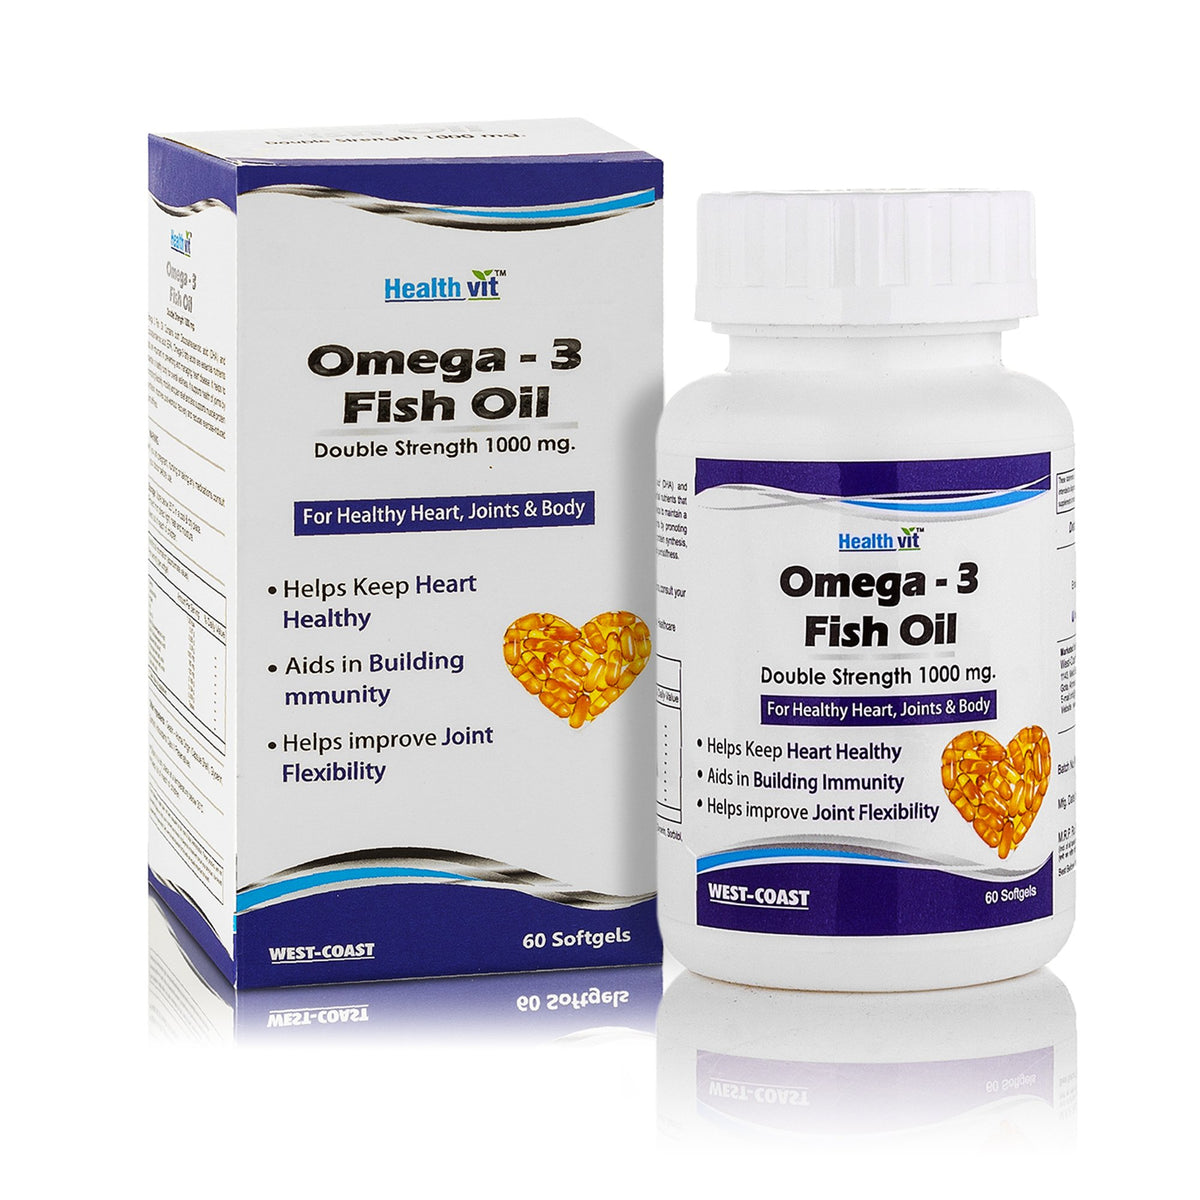 Healthvit Omega 3 Fish Oil Double Strength (EPA & DHA) 1000mg 60 Softgels for Healthy Heart, Joints & Body